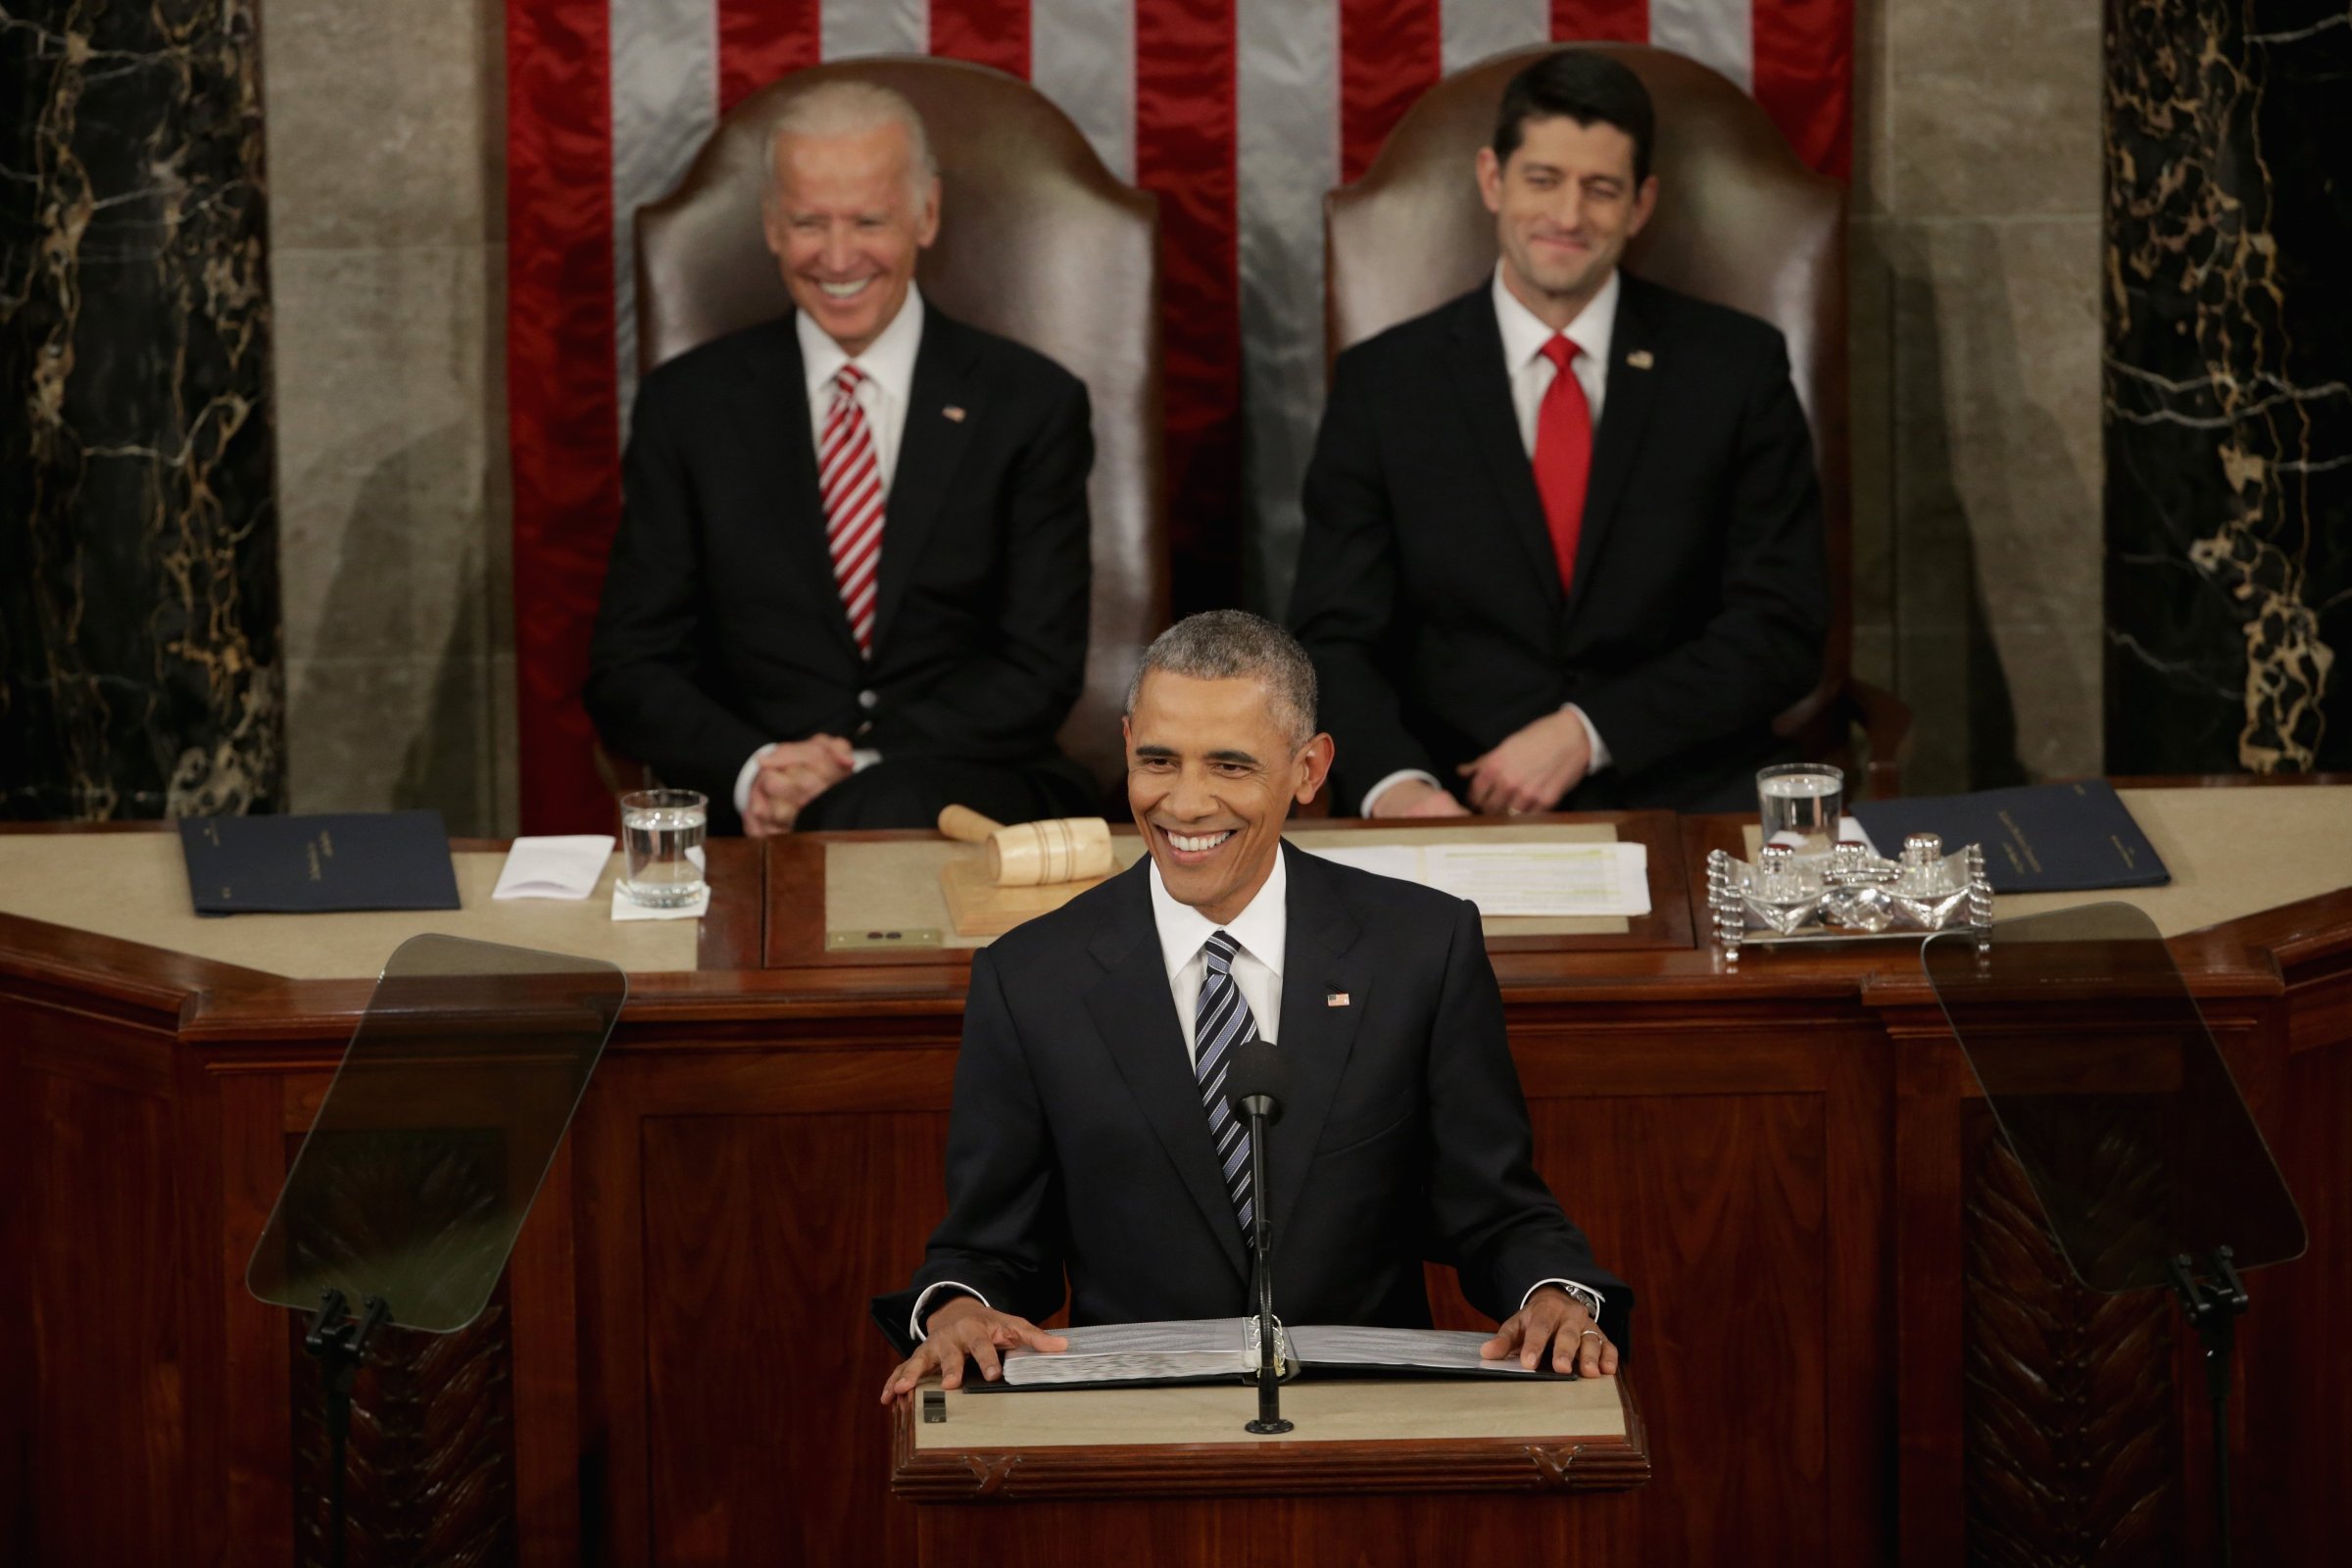 U.S. President Barack Obama delivers the State of the Union speech before members of Congress in the House chamber of the U.S. Capitol Jan. 12, 2016 in Washington.